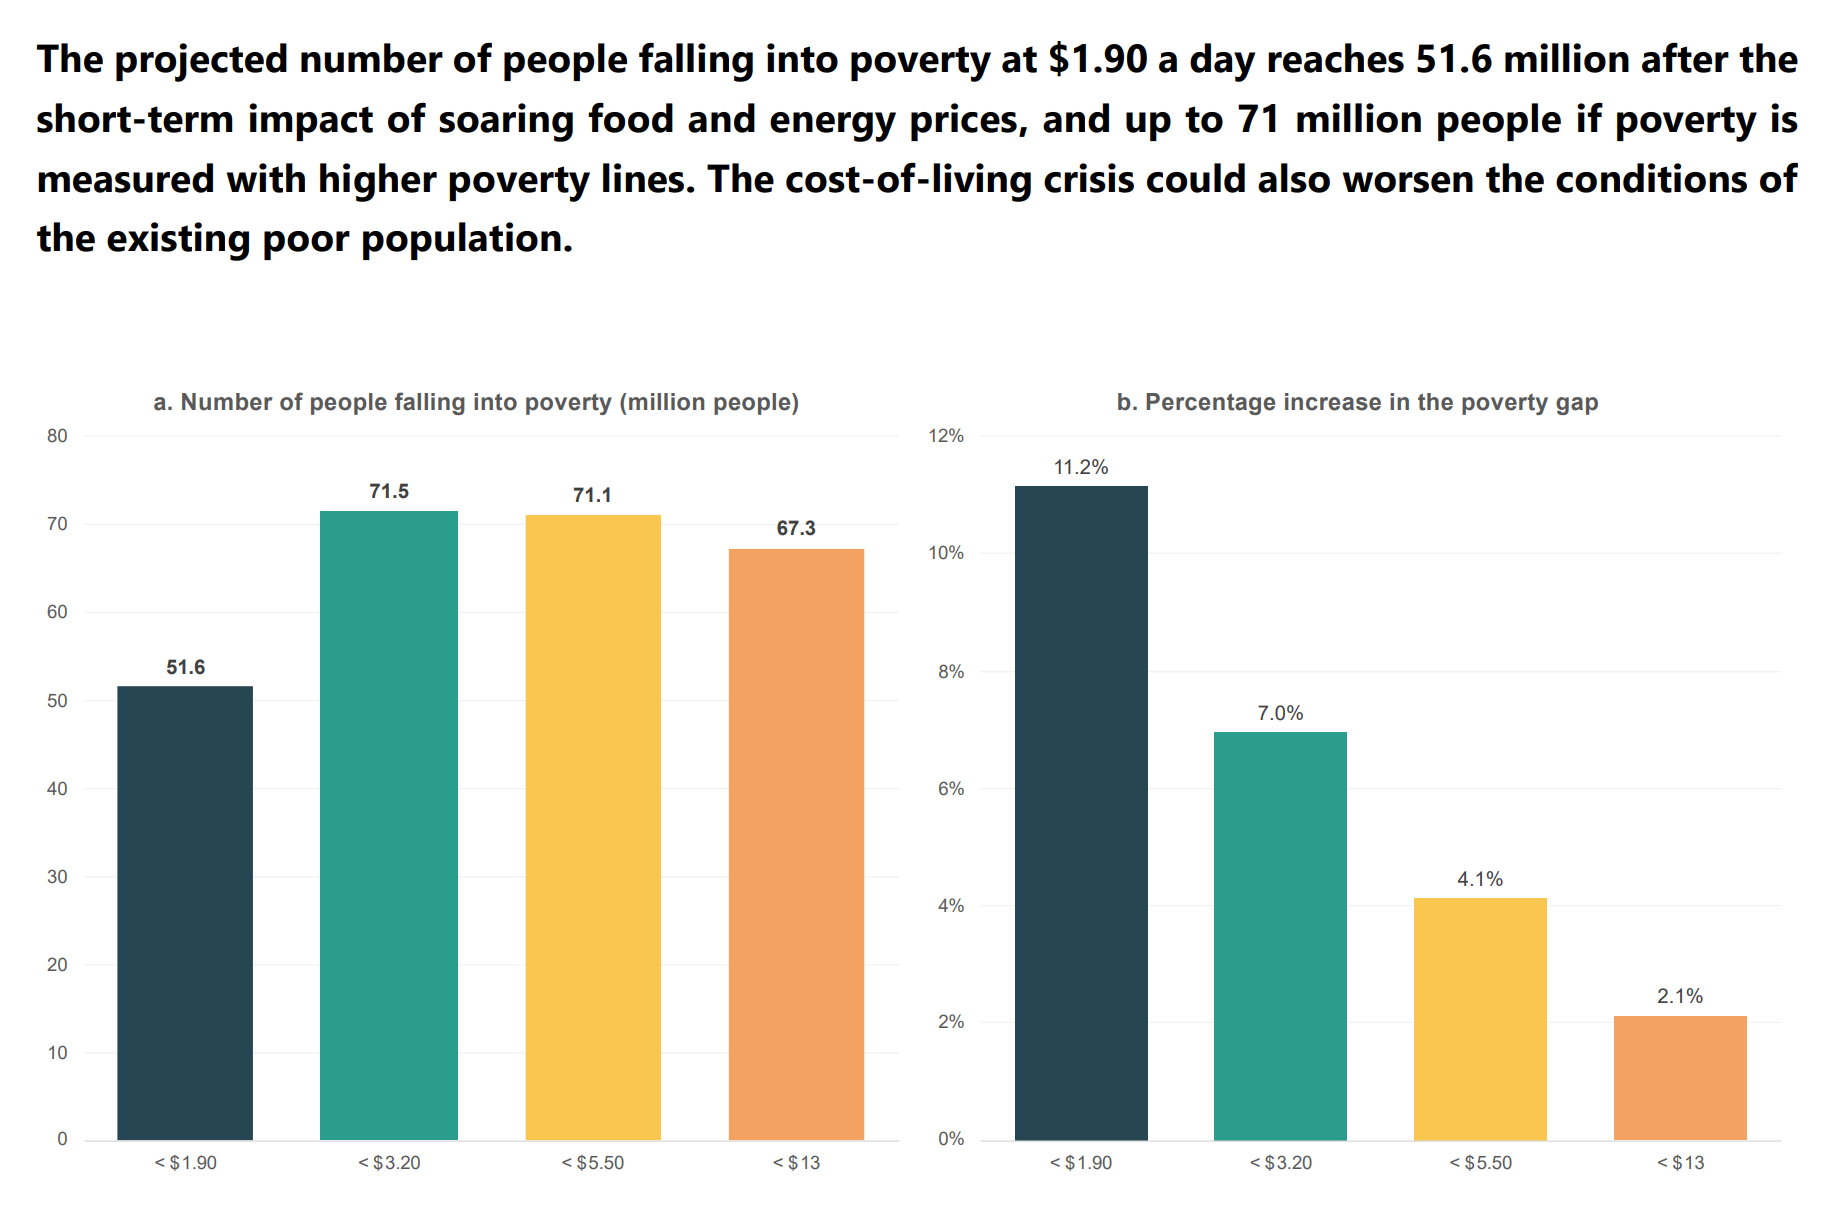 Number of people who could fall below different monetary thresholds as a result of soaring food and energy prices vis-à-vis the benchmark scenario (million people). Panel b plots the percentage increase in the poverty gaps estimated in the cost-of-living scenario vis-à-vis those estimated in the benchmark scenario. The projected number of people falling into poverty at $1.90 a day reaches 51.6 million after the short-term impact of soaring food and energy prices, and up to 71 million people if poverty is measured with higher poverty lines. The cost-of-living crisis could also worsen the conditions of the existing poor population. The poverty gap is defined as the average shortfall in per capita income as a proportion of the corresponding monetary threshold. The gaps estimated for the $1.90, $3.20, $5.50, and $13-a-day thresholds are, respectively: 0.028, 0.077, 0.181, and 0.405 in the benchmark scenario, and 0.031, 0.082, 0.188, and 0.414 in the cost-of-living scenario. Data: Authors’ own elaboration based on the sources described in the text. Graphic: UNDP